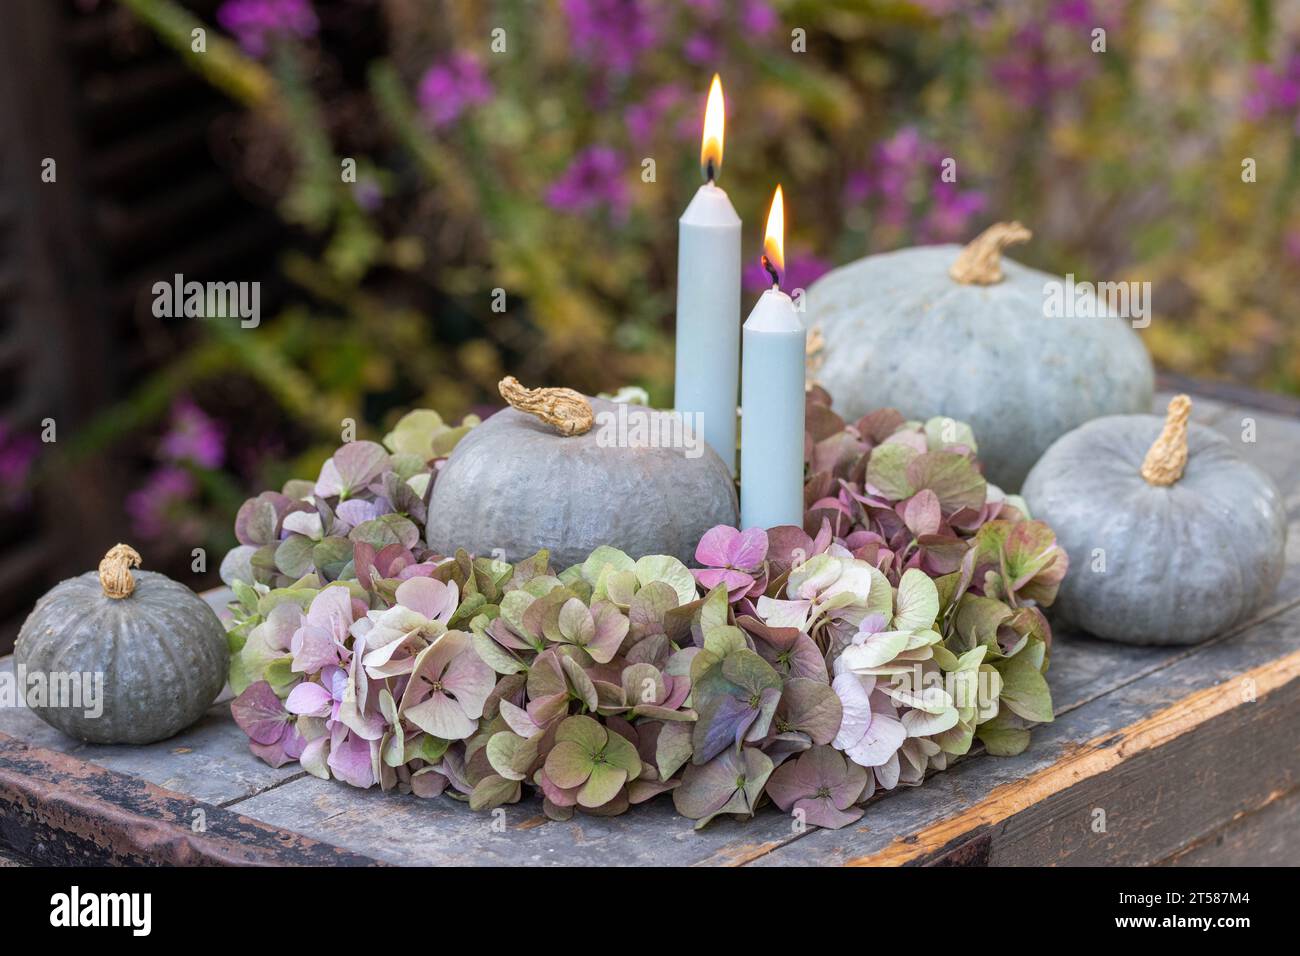 autumn arrangement with candles, wreath of hydrangea flowers and pumpkins Stock Photo